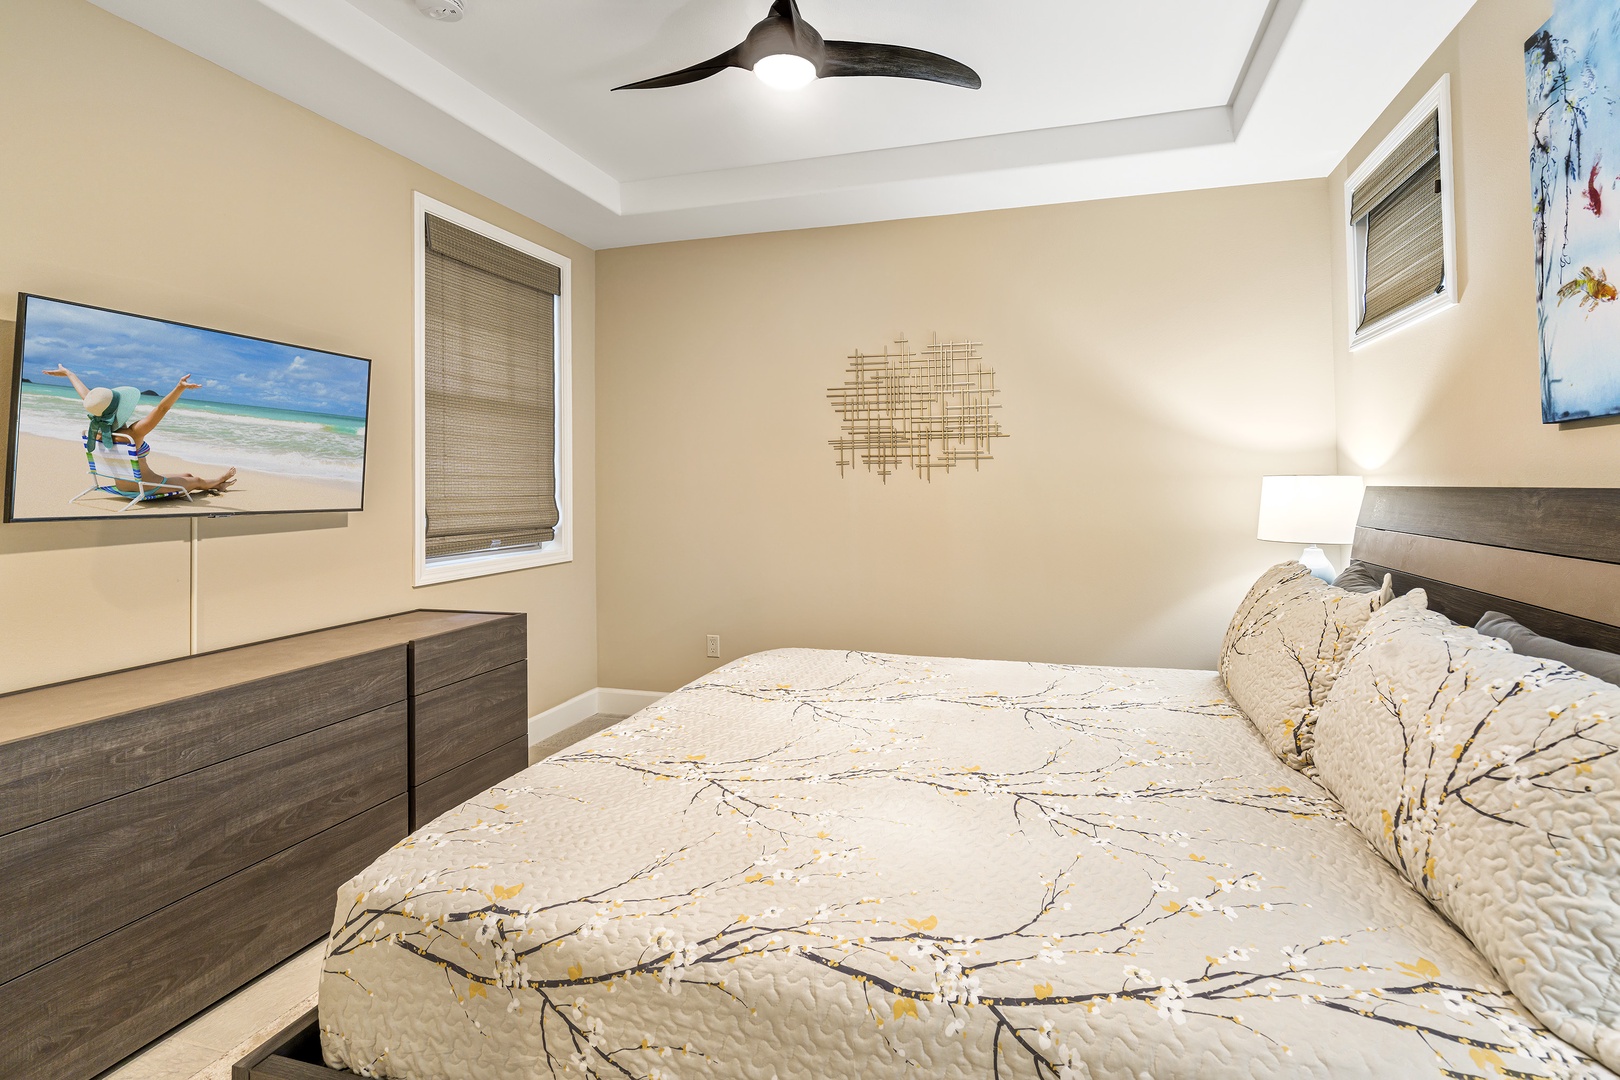 Kailua Kona Vacation Rentals, Holua Kai #9 - Equipped with A/C, TV, ensuite, Cal King bed and more